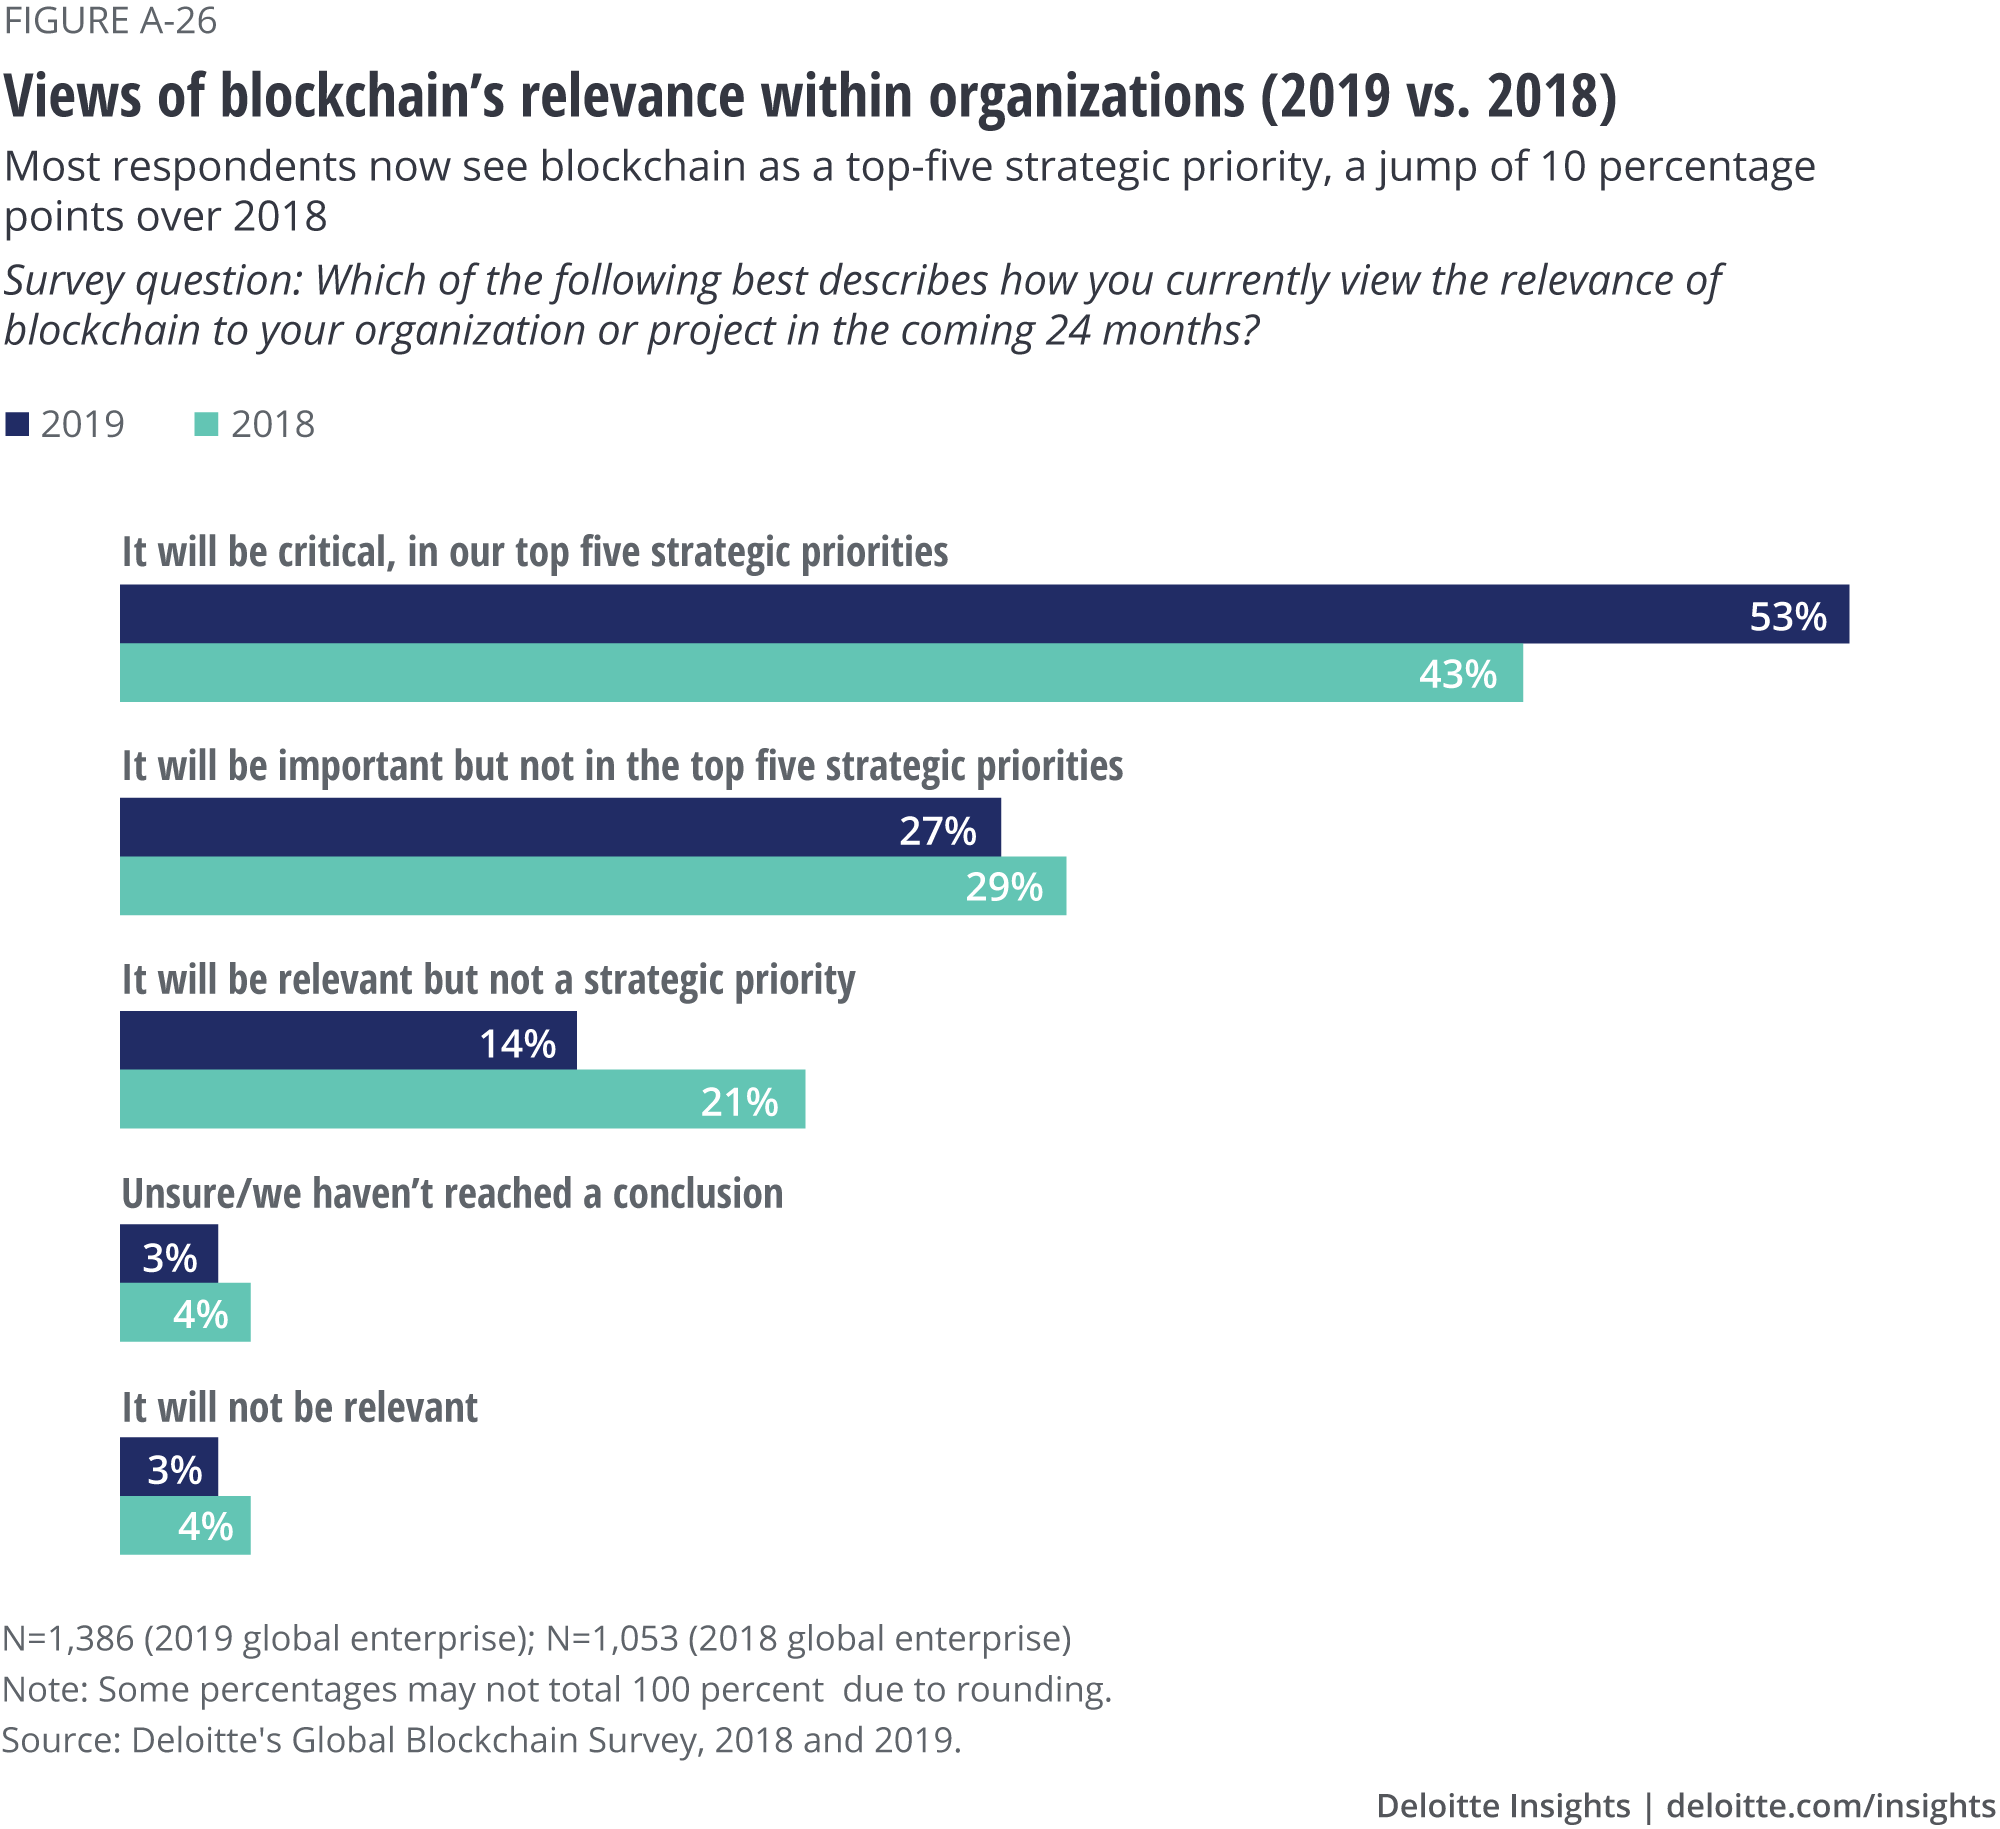 Views of blockchain's relevance within organizations (2019 vs. 2018)